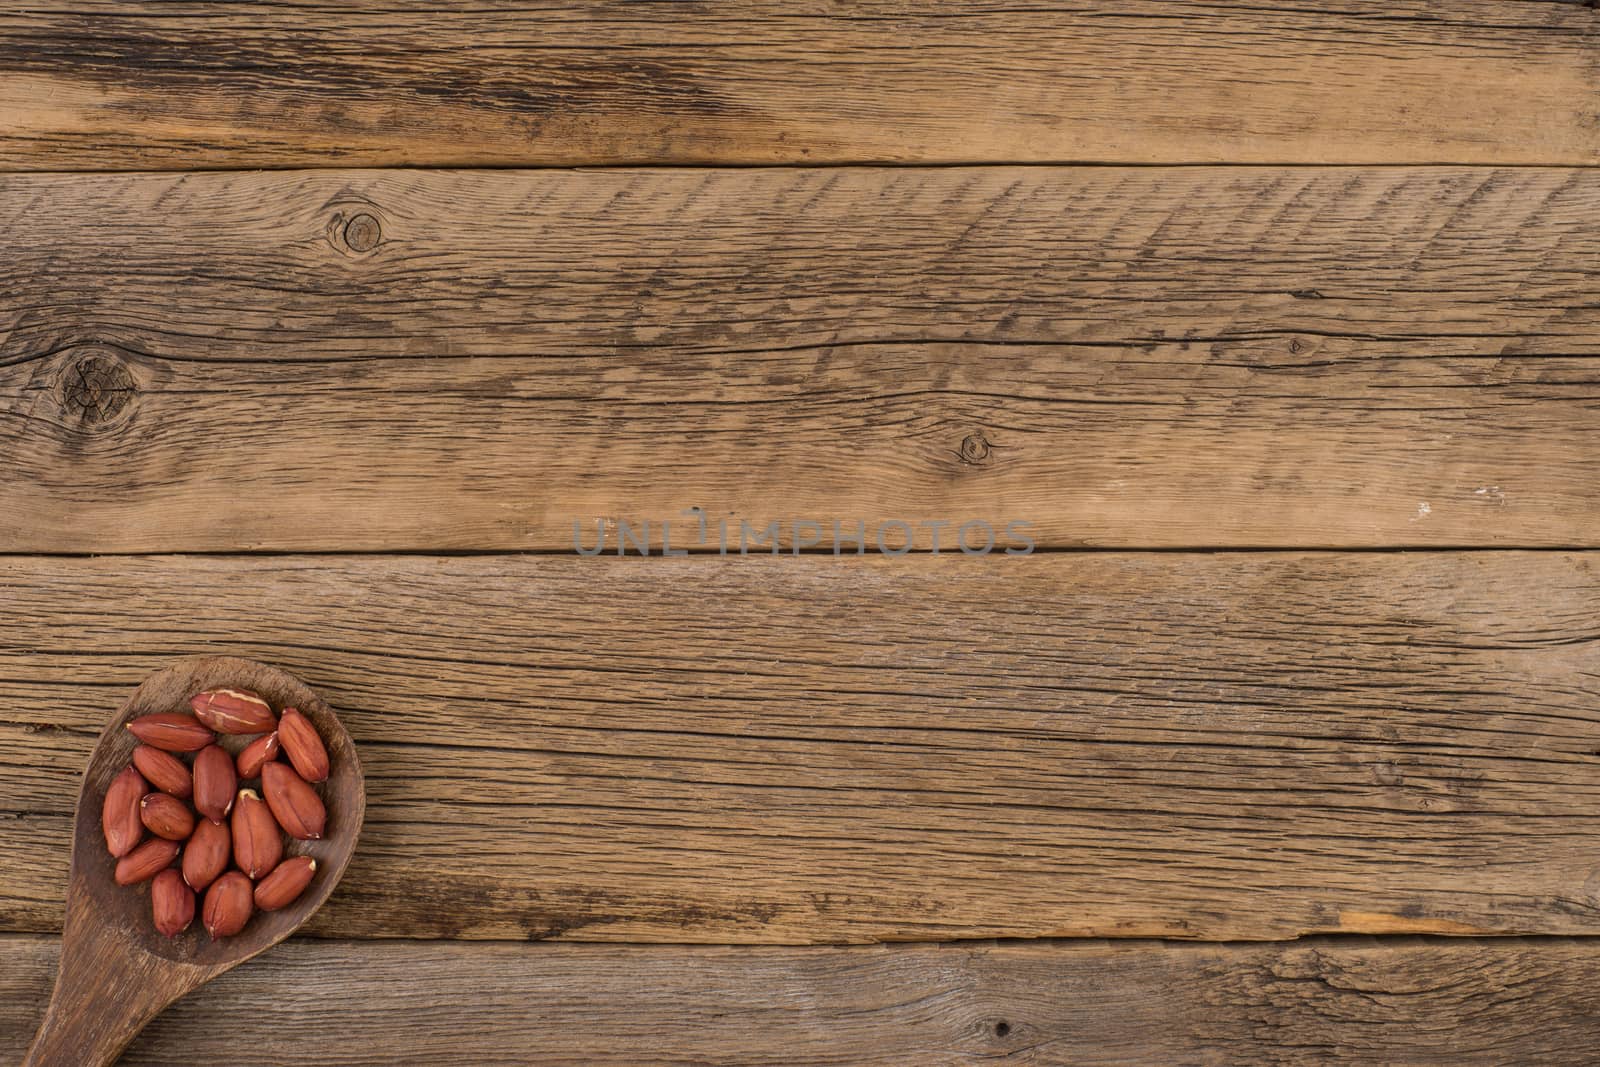 Peanuts in wooden spoon on old wooden background.  by DGolbay